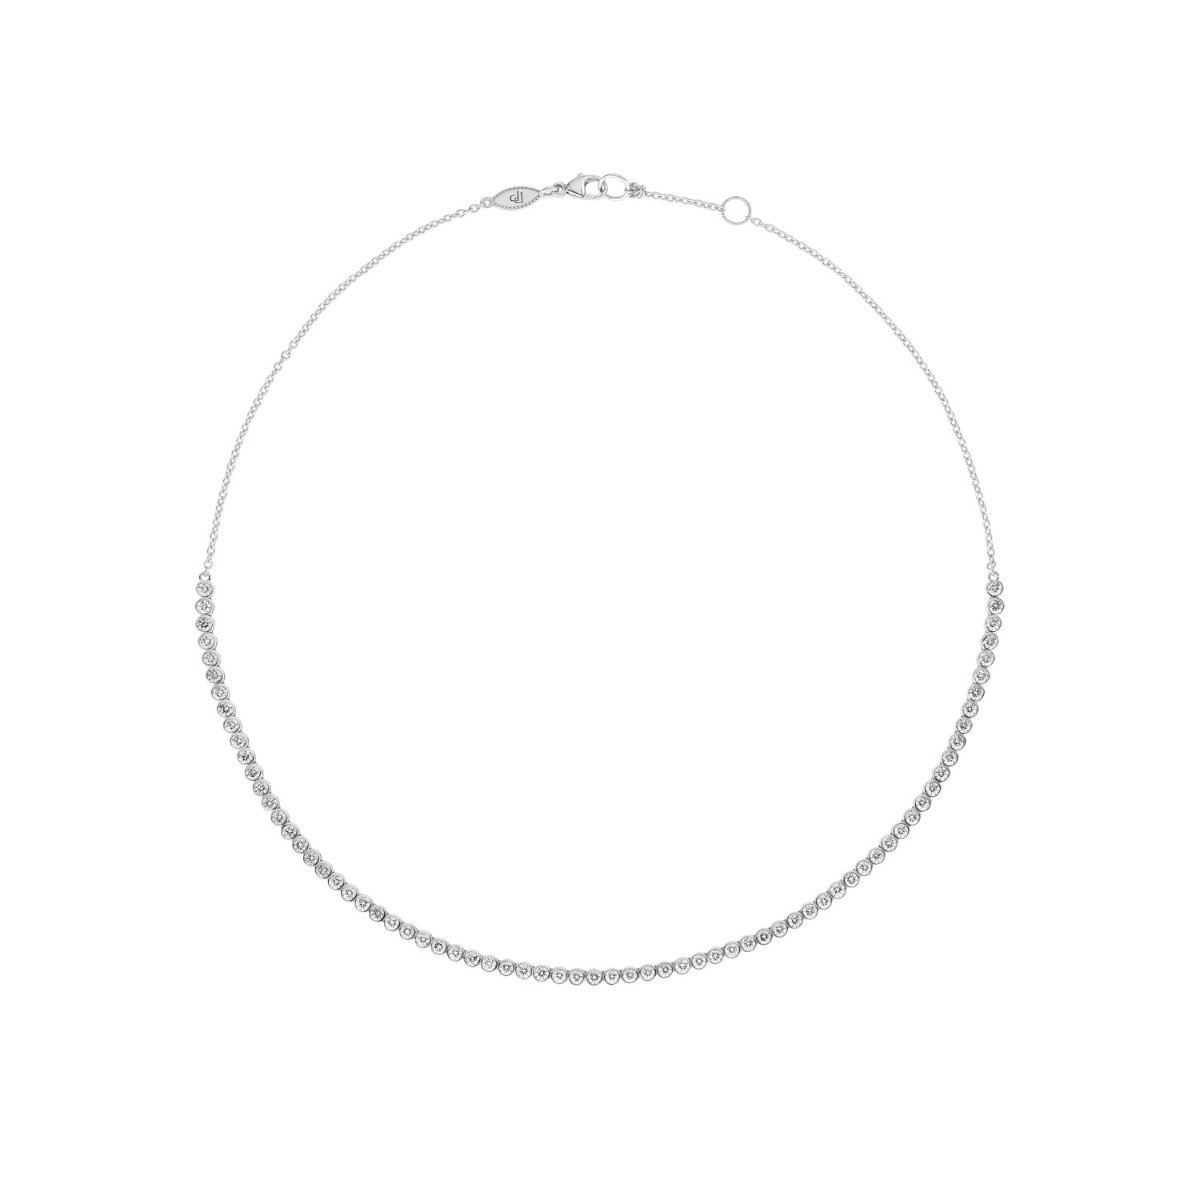 Penny Preville Diamond Half Way Choker Necklace in 18kt White Gold